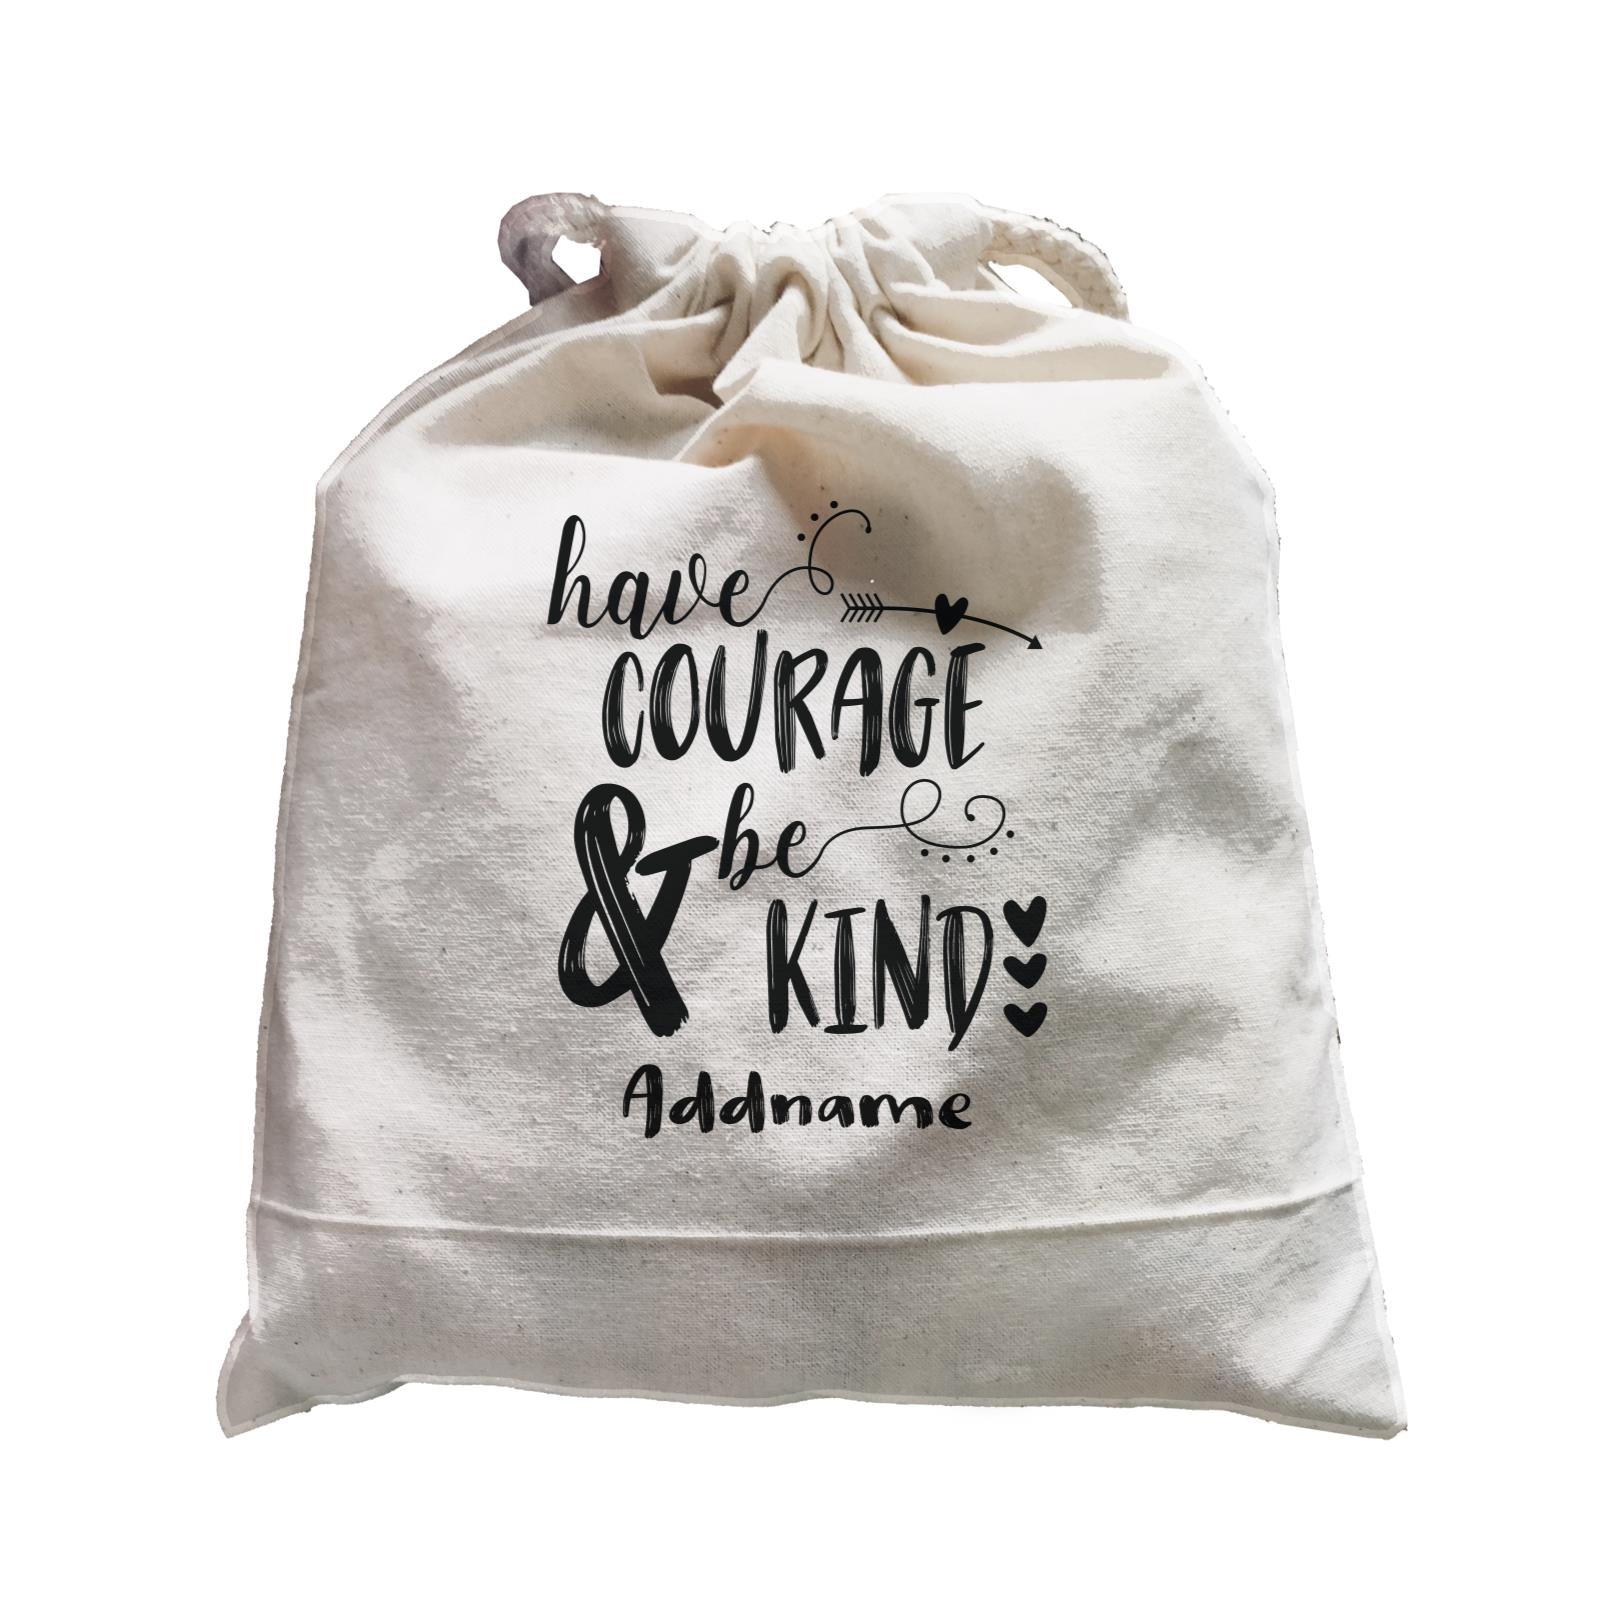 Inspiration Quotes Have Courage And Be Kind Addname Satchel